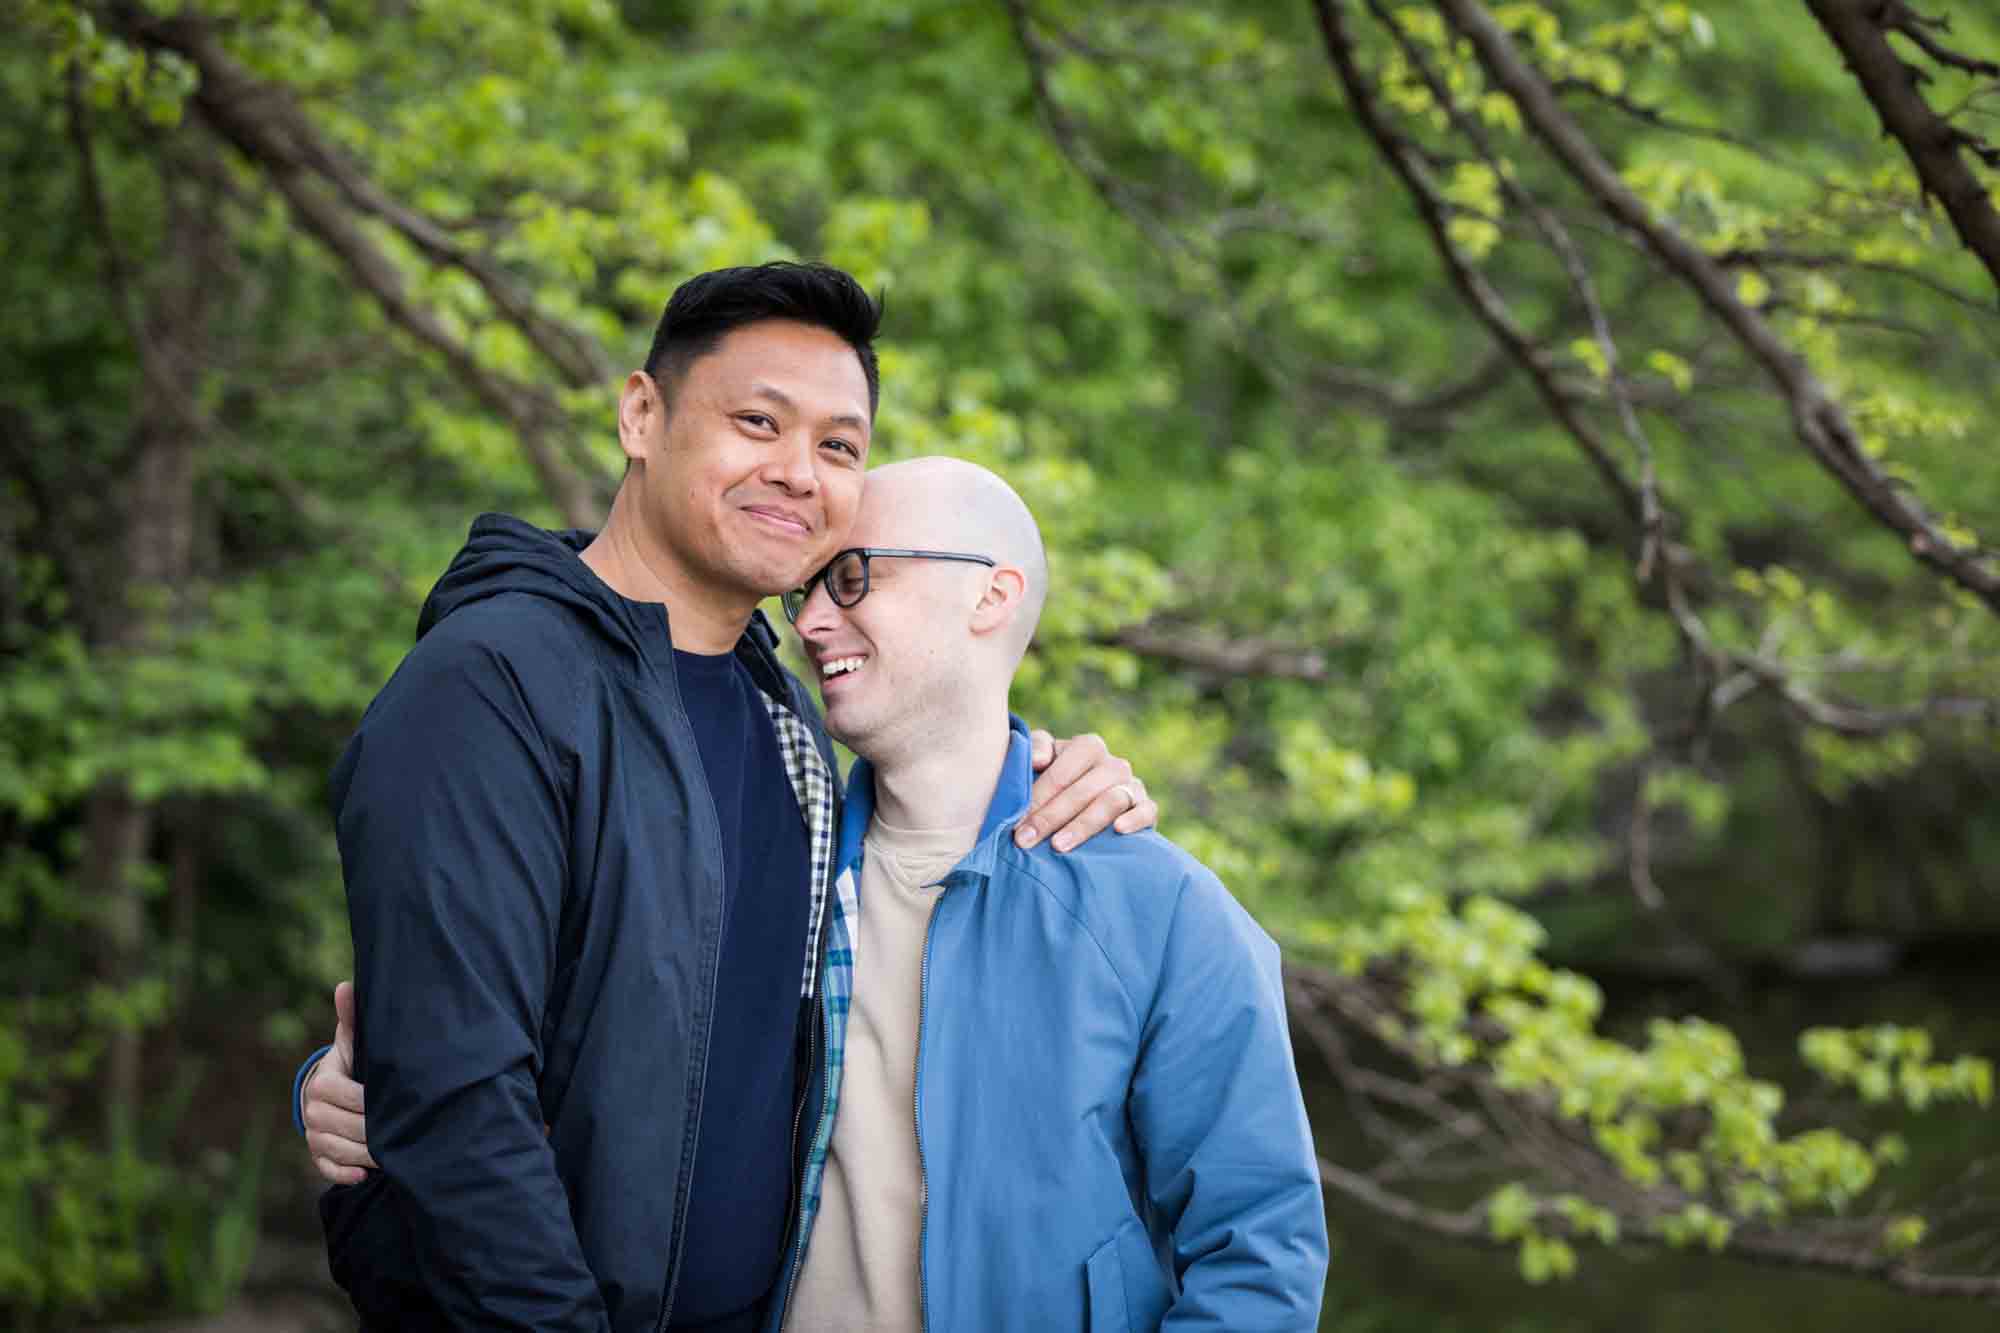 Two men embracing in front of tree branches from a Central Park engagement photo shoot